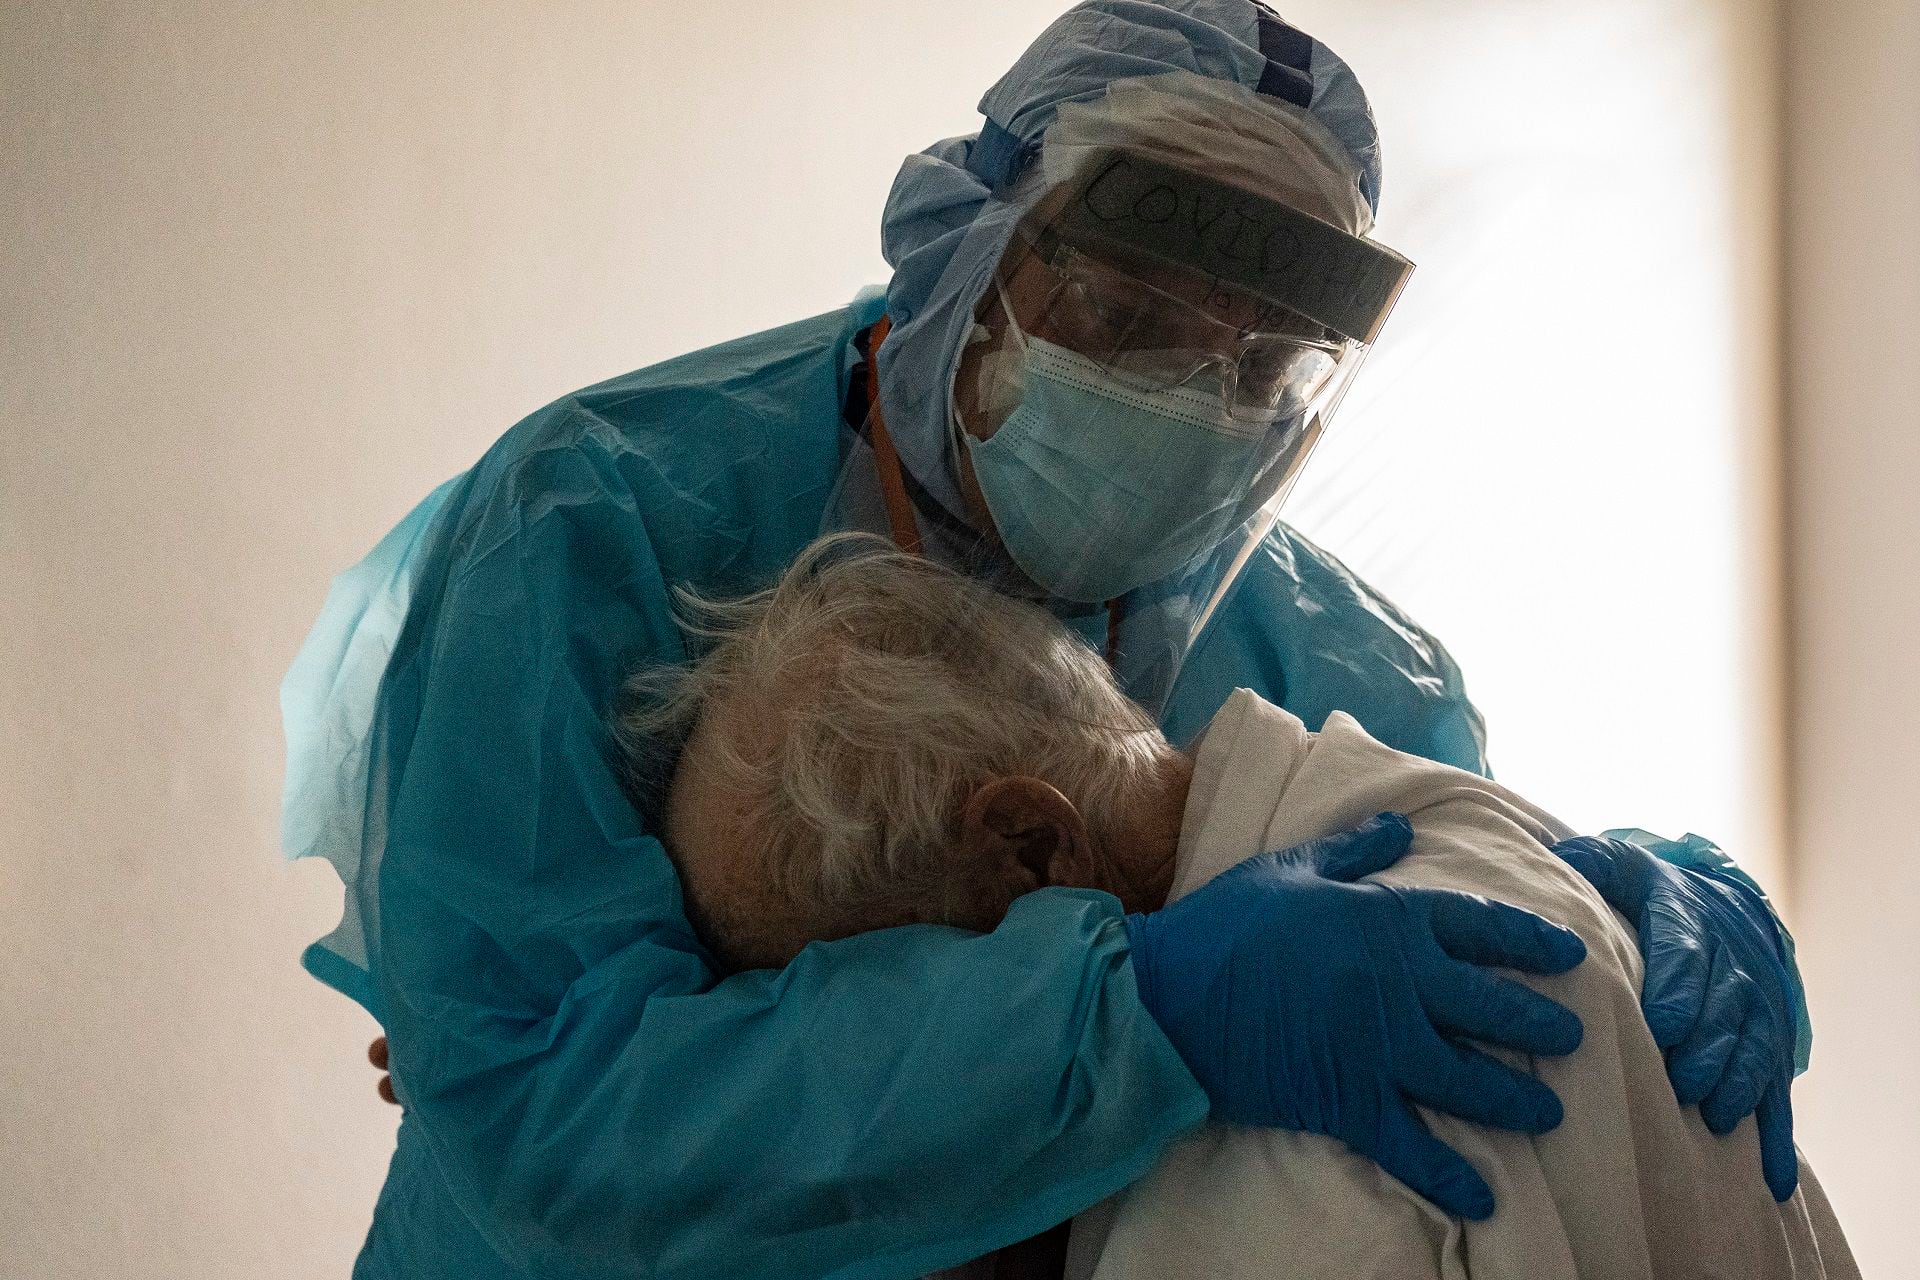 HOUSTON, TX - NOVEMBER 26: (EDITORIAL USE ONLY) Dr. Joseph Varon hugs and comforts a patient in the COVID-19 intensive care unit (ICU) during Thanksgiving at the United Memorial Medical Center on November 26, 2020 in Houston, Texas. According to reports, Texas has reached over 1,220,000 cases, including over 21,500 deaths.   Go Nakamura/Getty Images/AFP